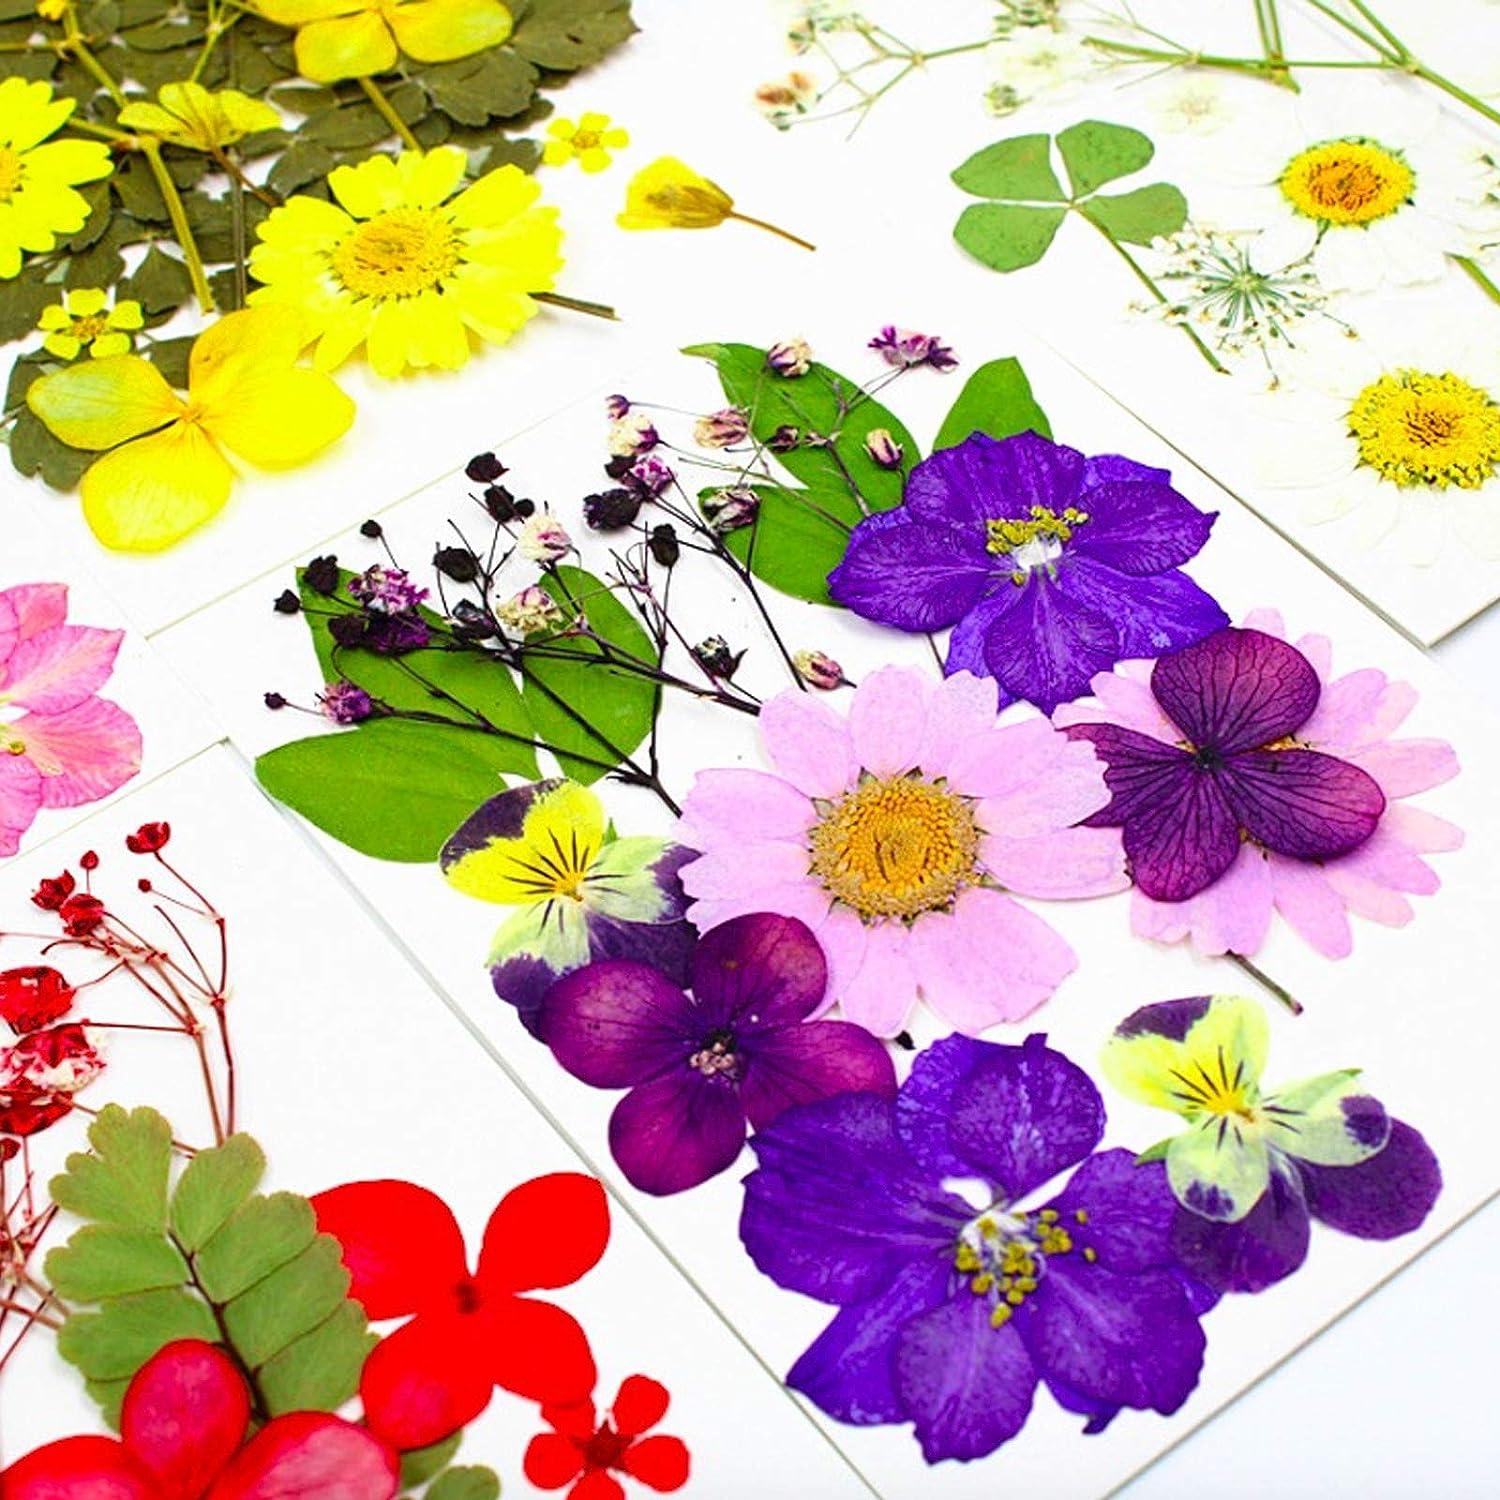 Colorful Real Dried Pressed Flowers Scrapbooking DIY Art Crafts Dried  Flowers for Art Makeup Floral Decors 12 